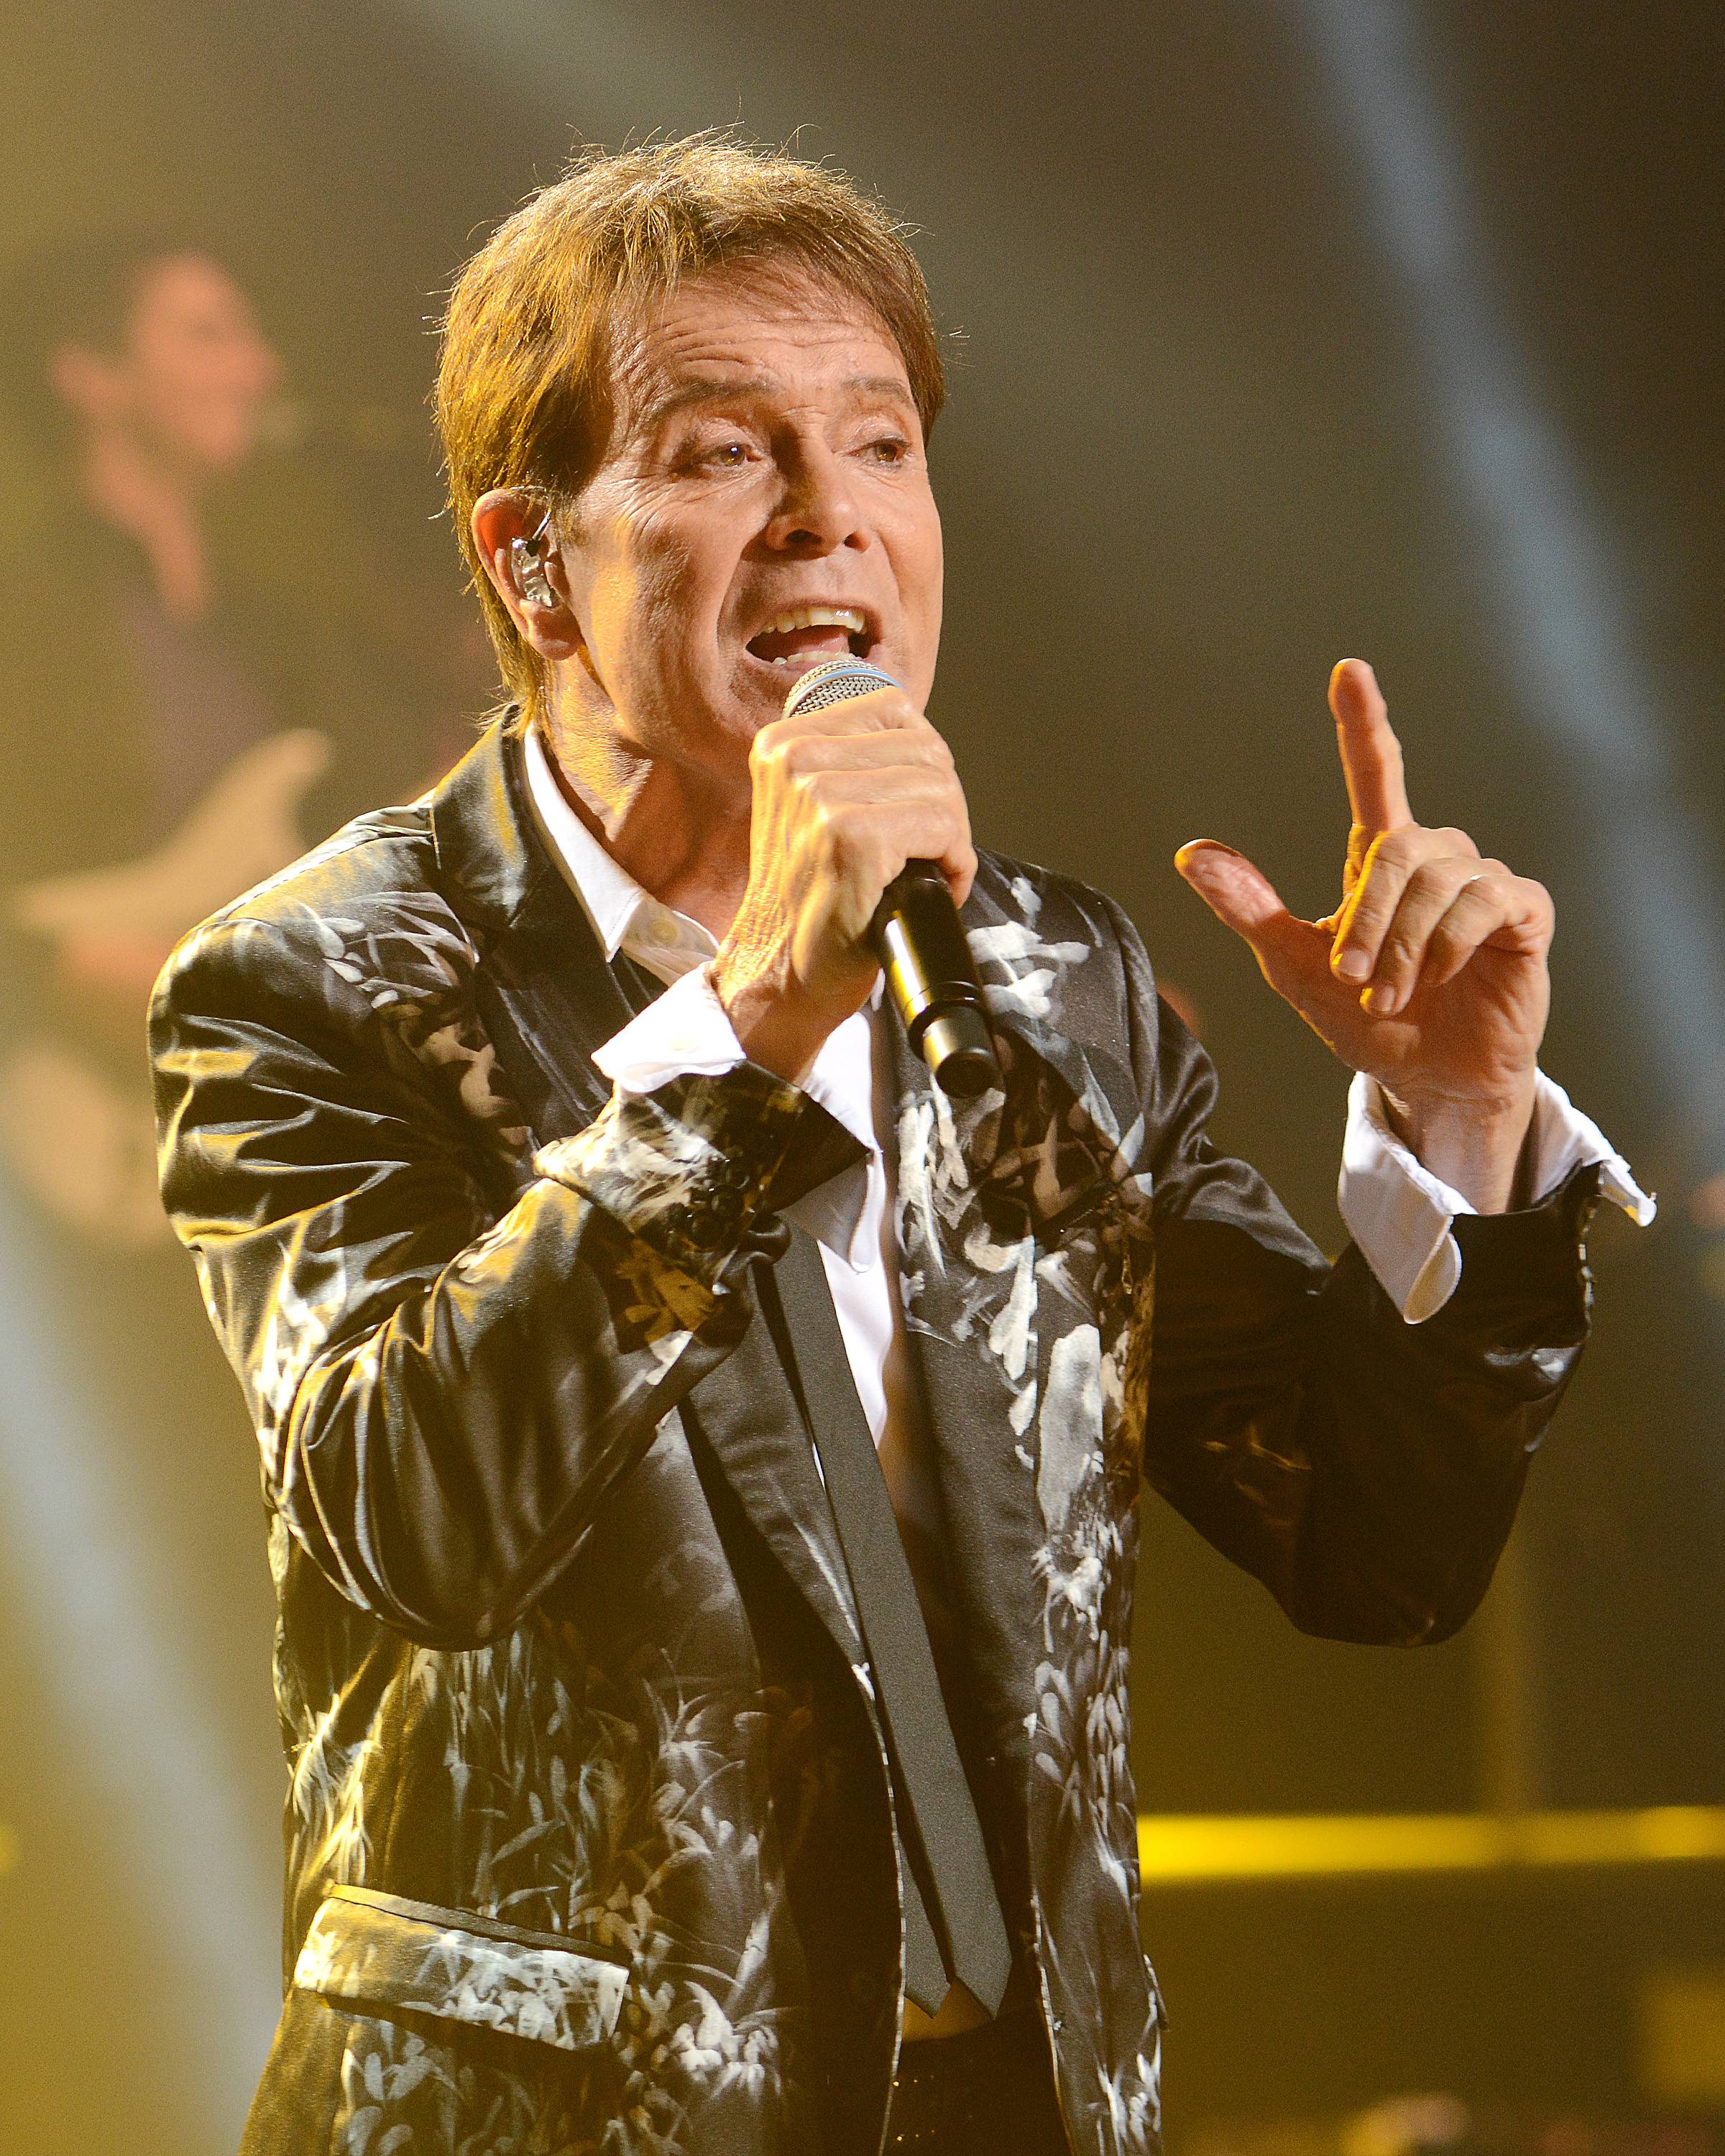 Cliff Richard performs at the Bord Gais Energy Theatre